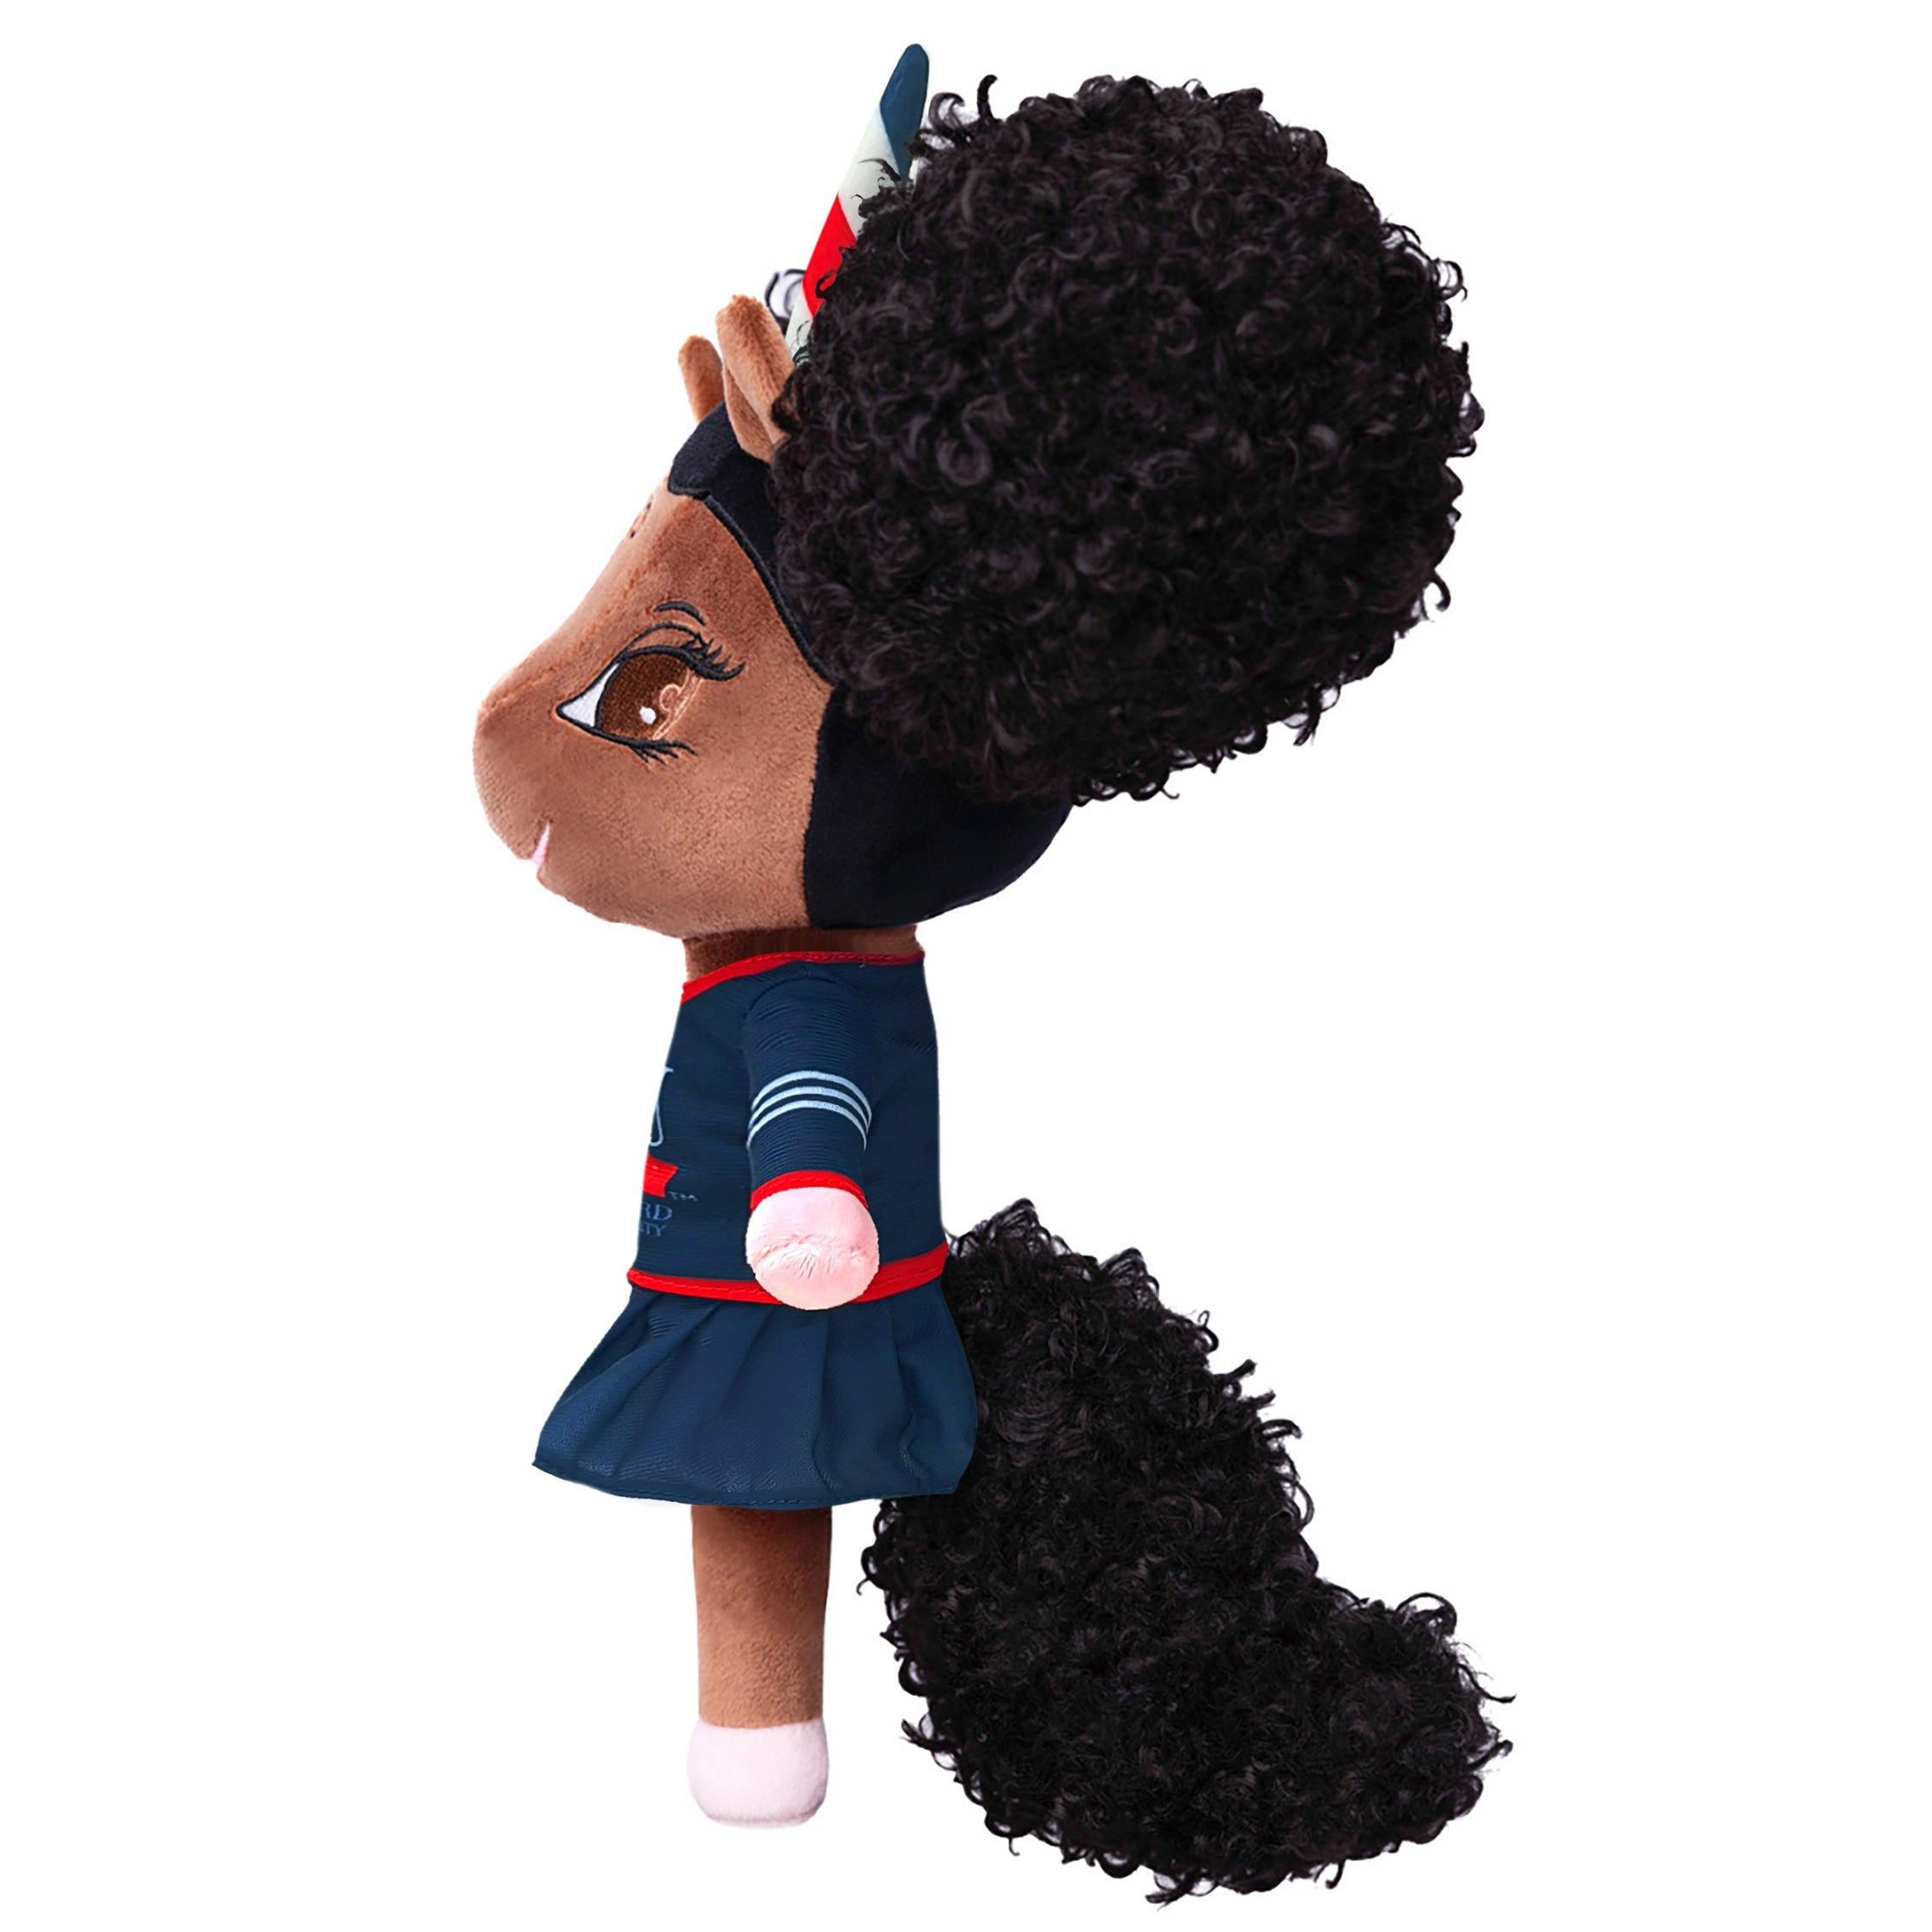 Howard University Institutional Logo Unicorn Doll with Afro Puffs - 14 inch